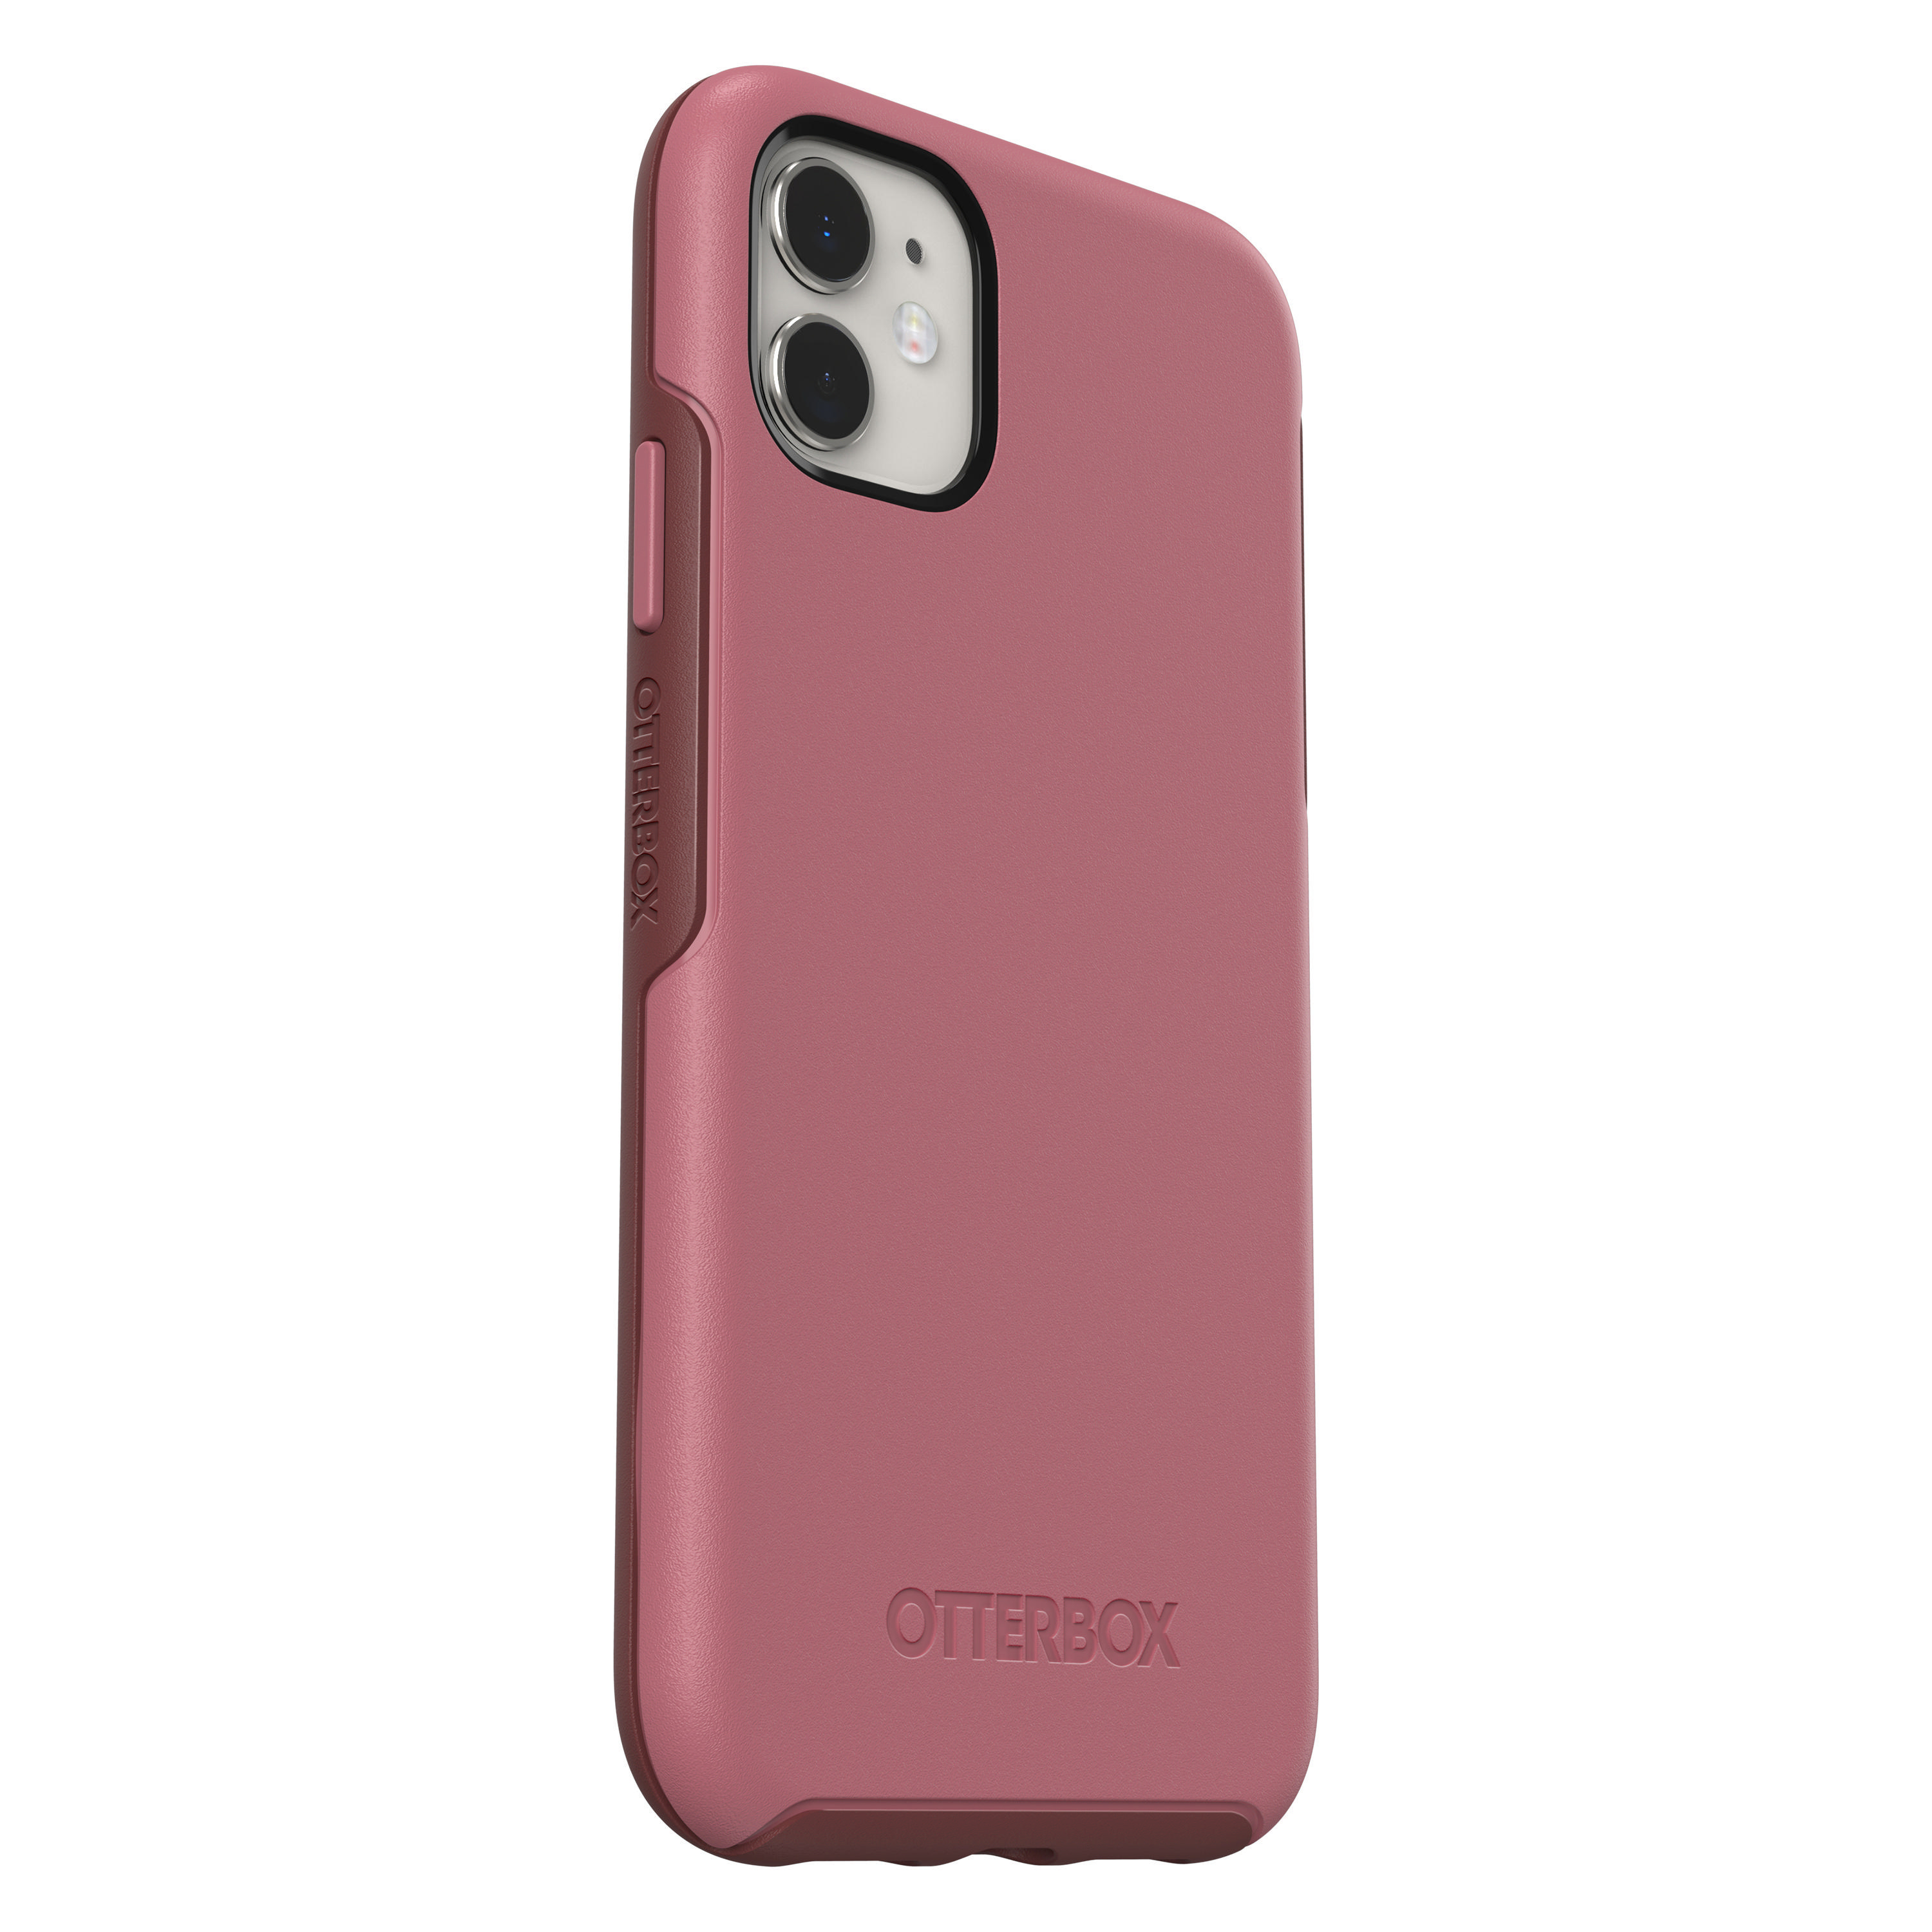 Backcover, Symmetry, iPhone OTTERBOX 11, Apple, Rosa